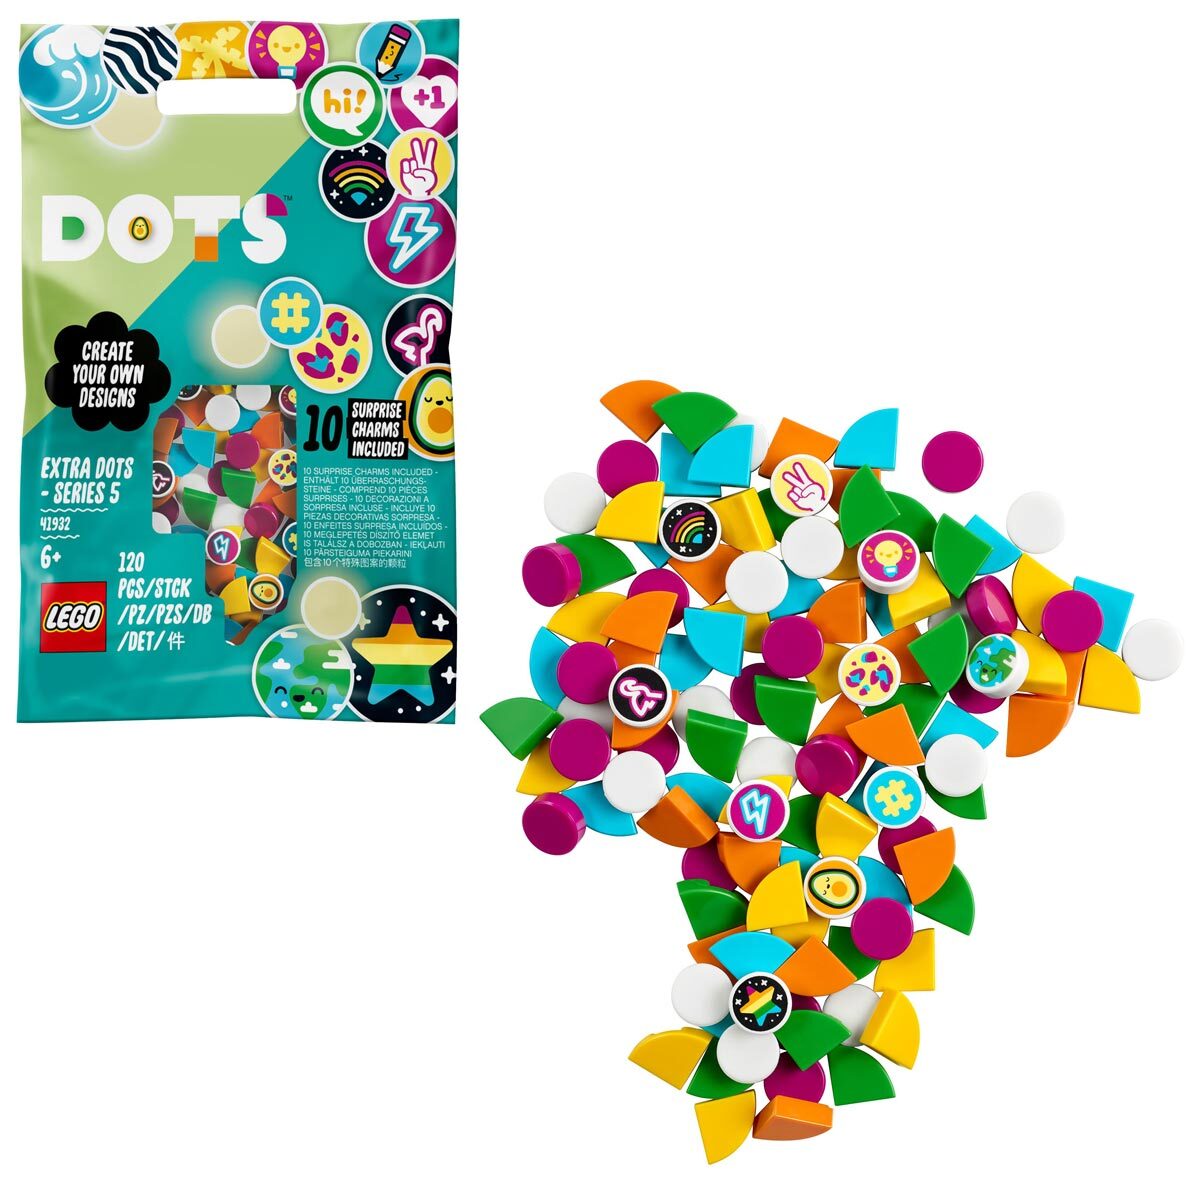 Buy LEGO Extra DOTS Series 4 Box & Product Image at costco.co.uk